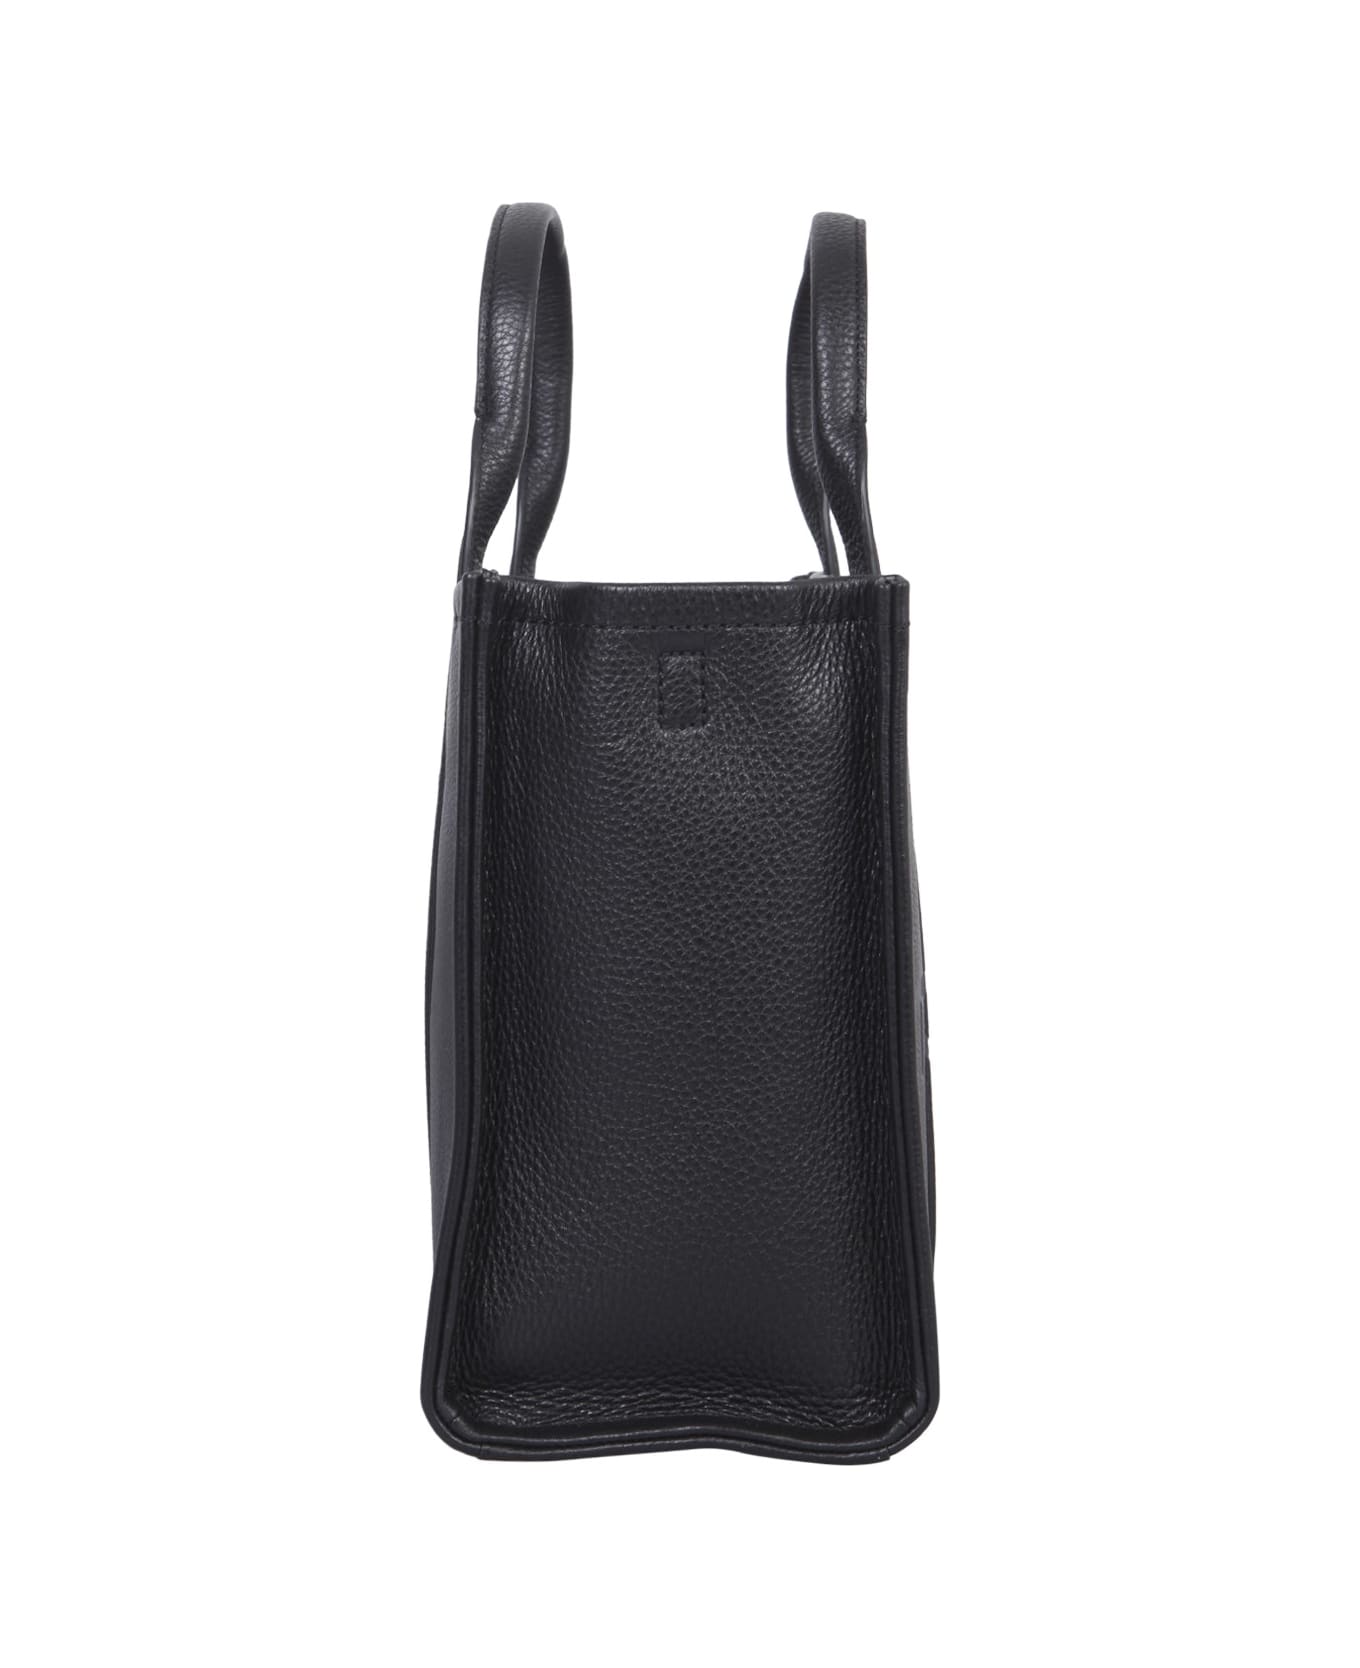 Marc Jacobs The Leather Medium Tote Bag - Black トートバッグ